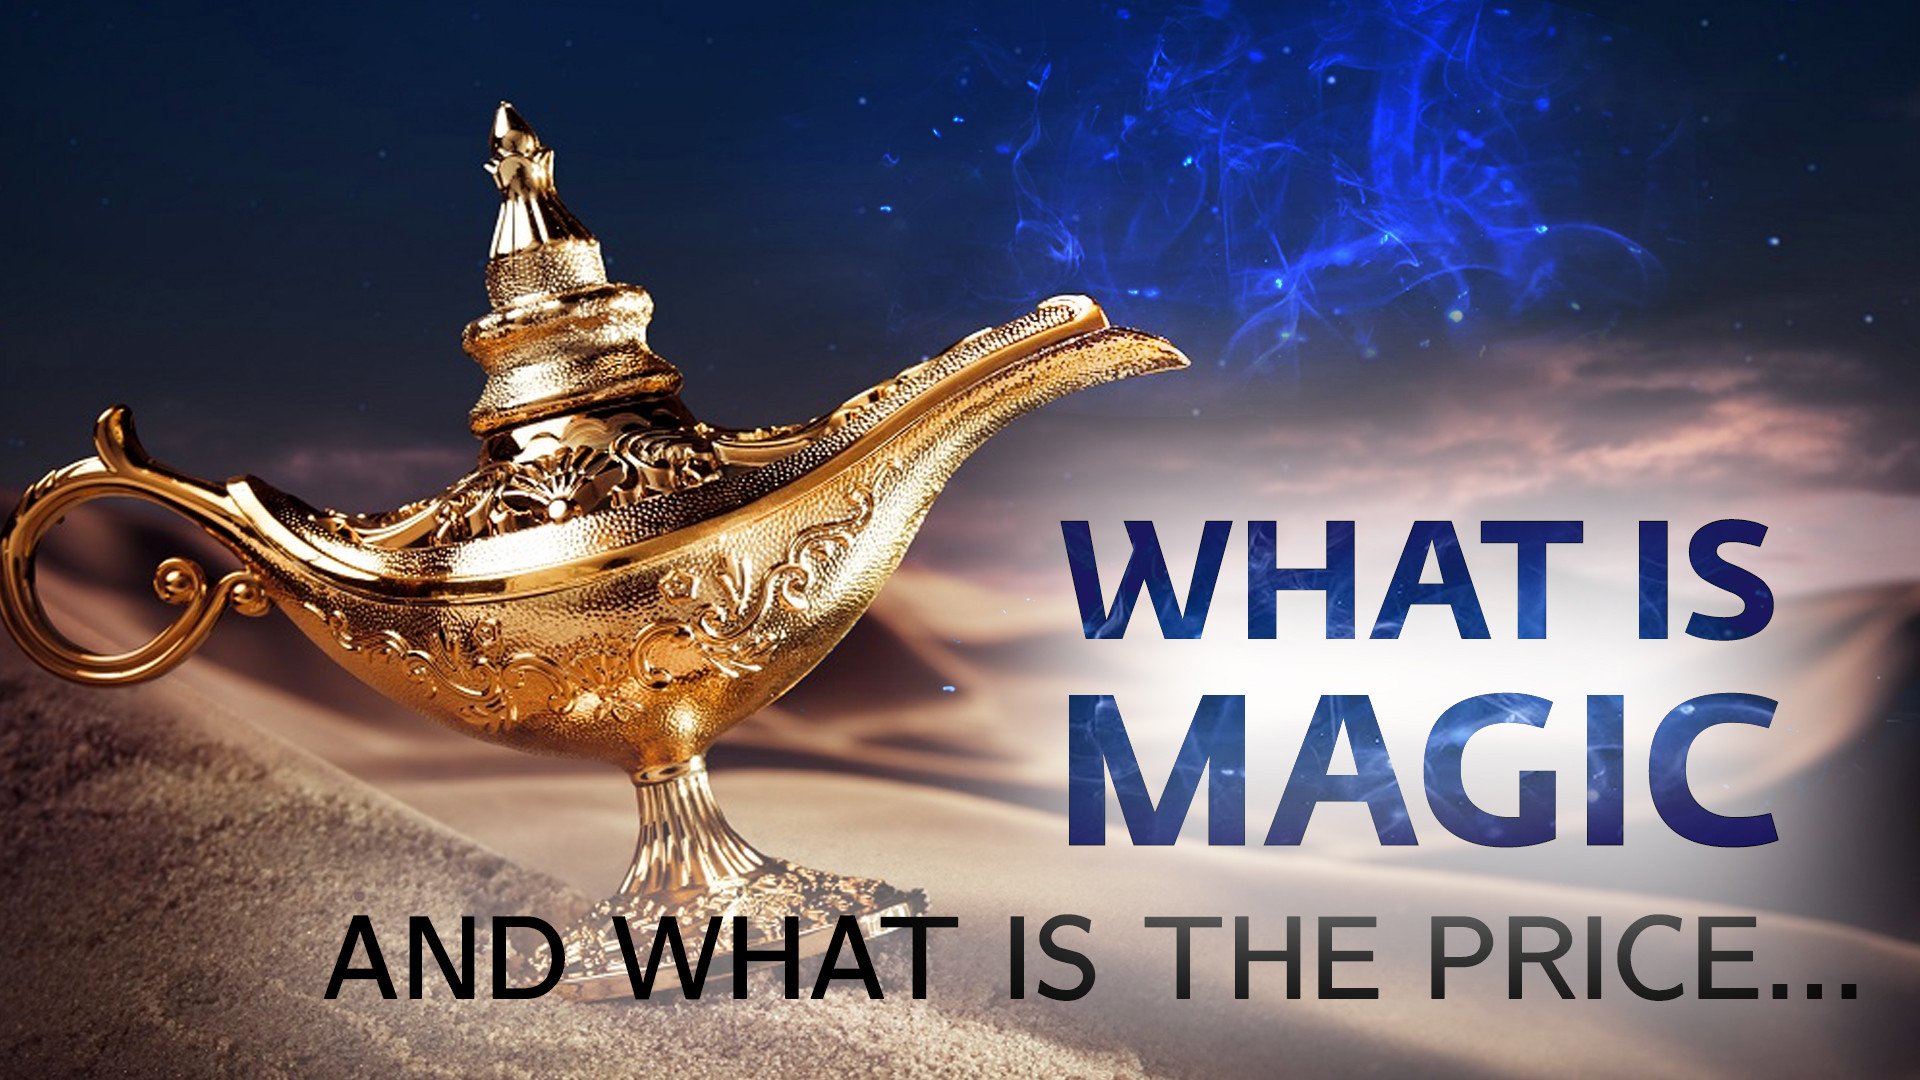 What is practical magic in a person's daily life? And what is the price...